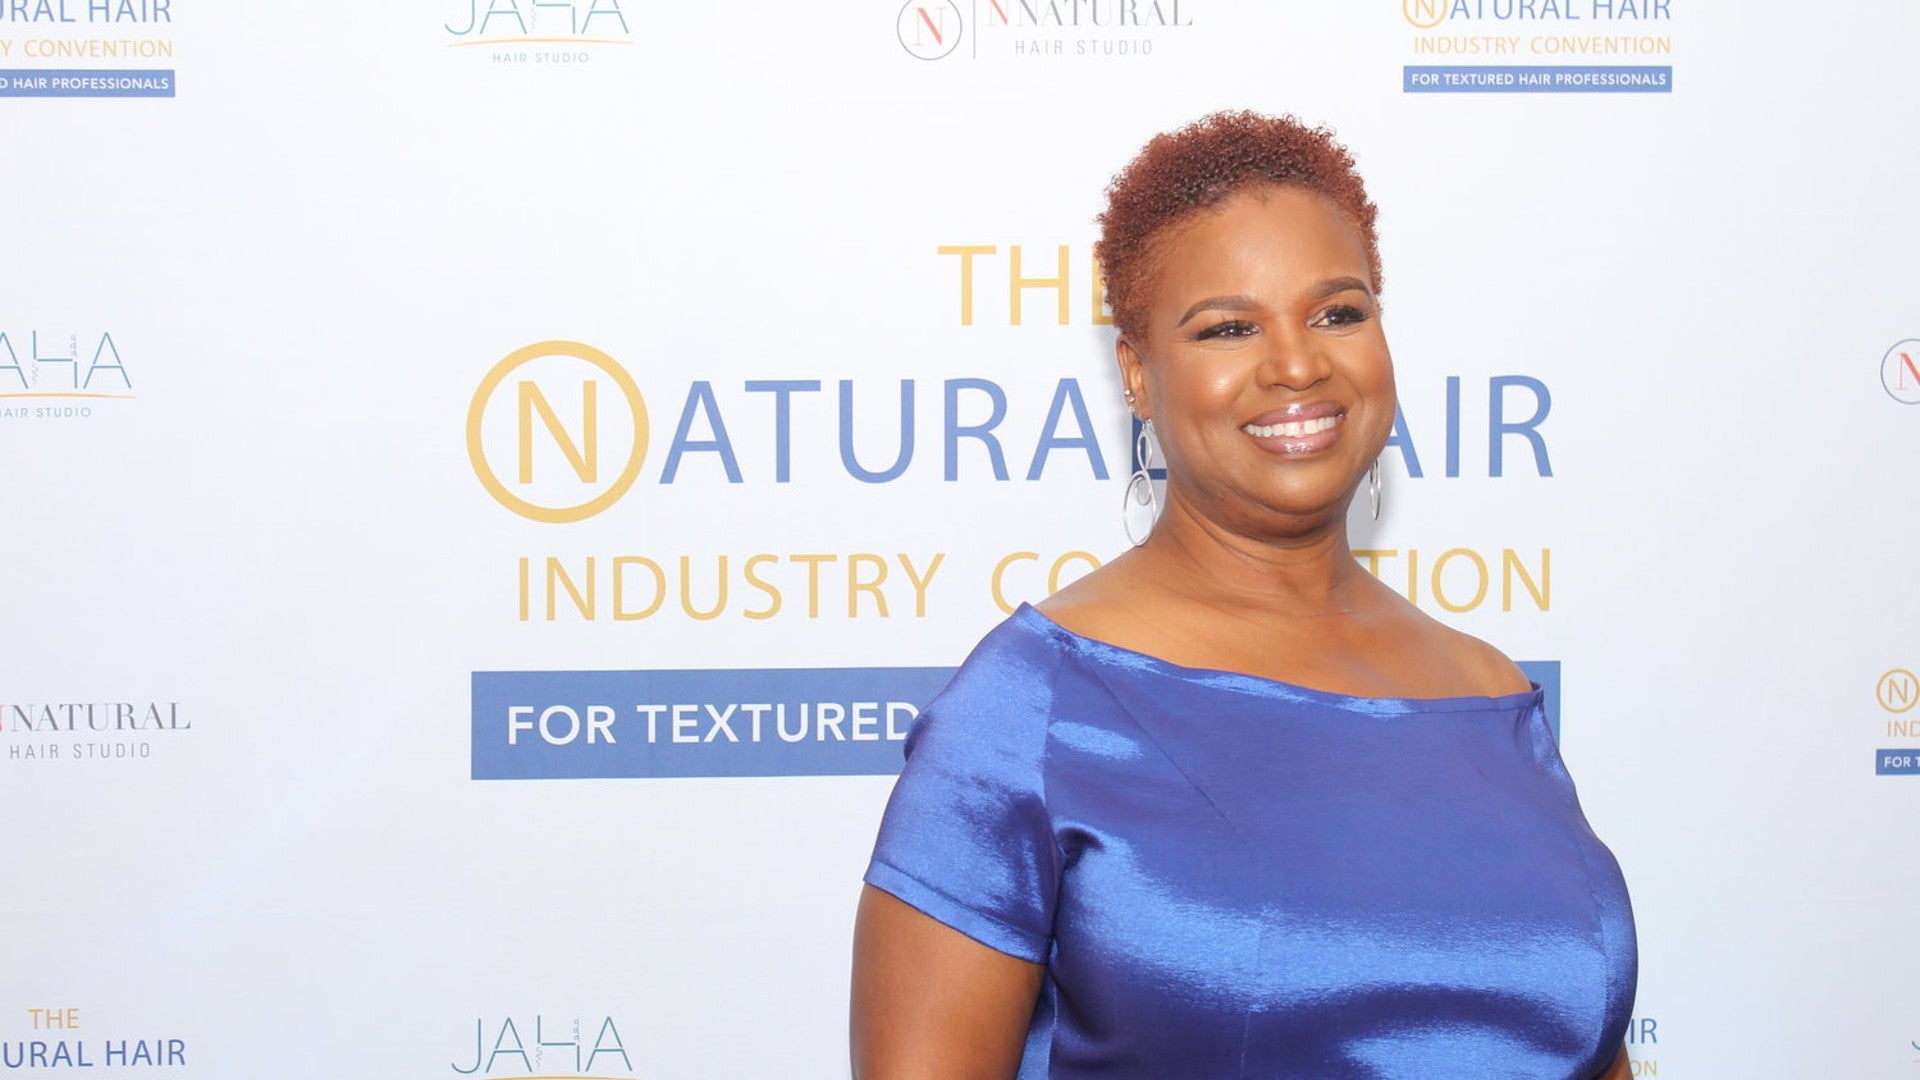 Natural Hair Industry Convention Founders Talk Discrimination And The CROWN Act